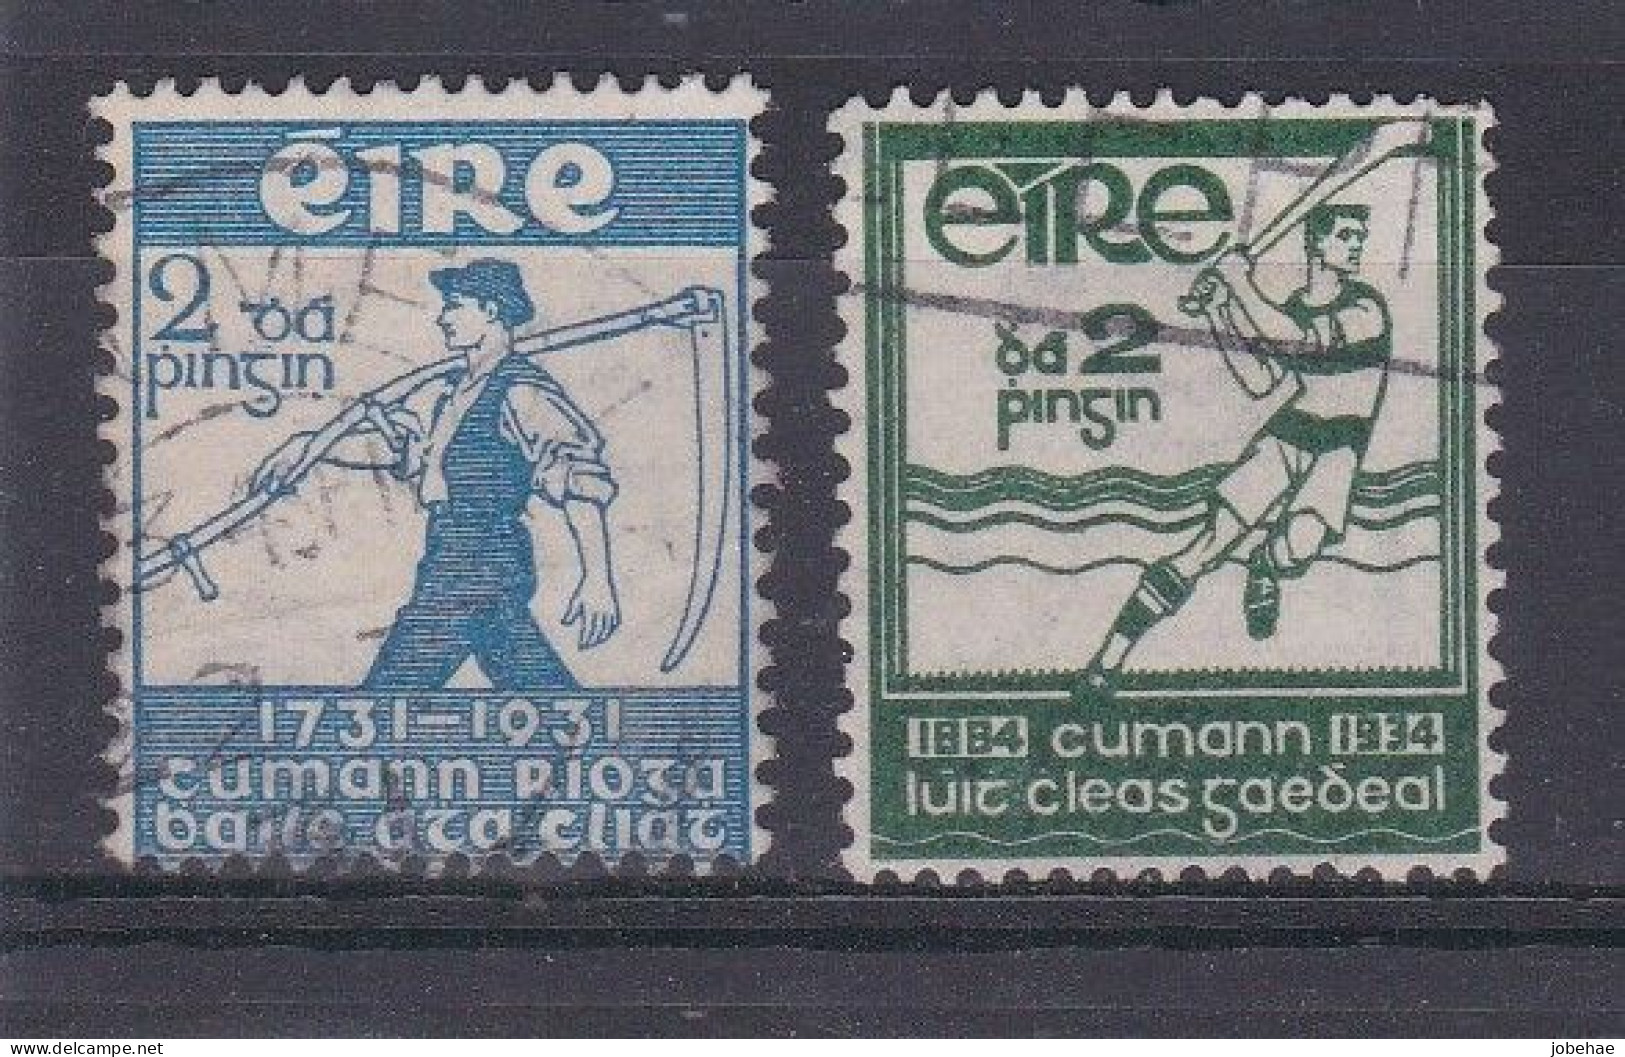 Irlande YT°-* 59 + 64 - Used Stamps